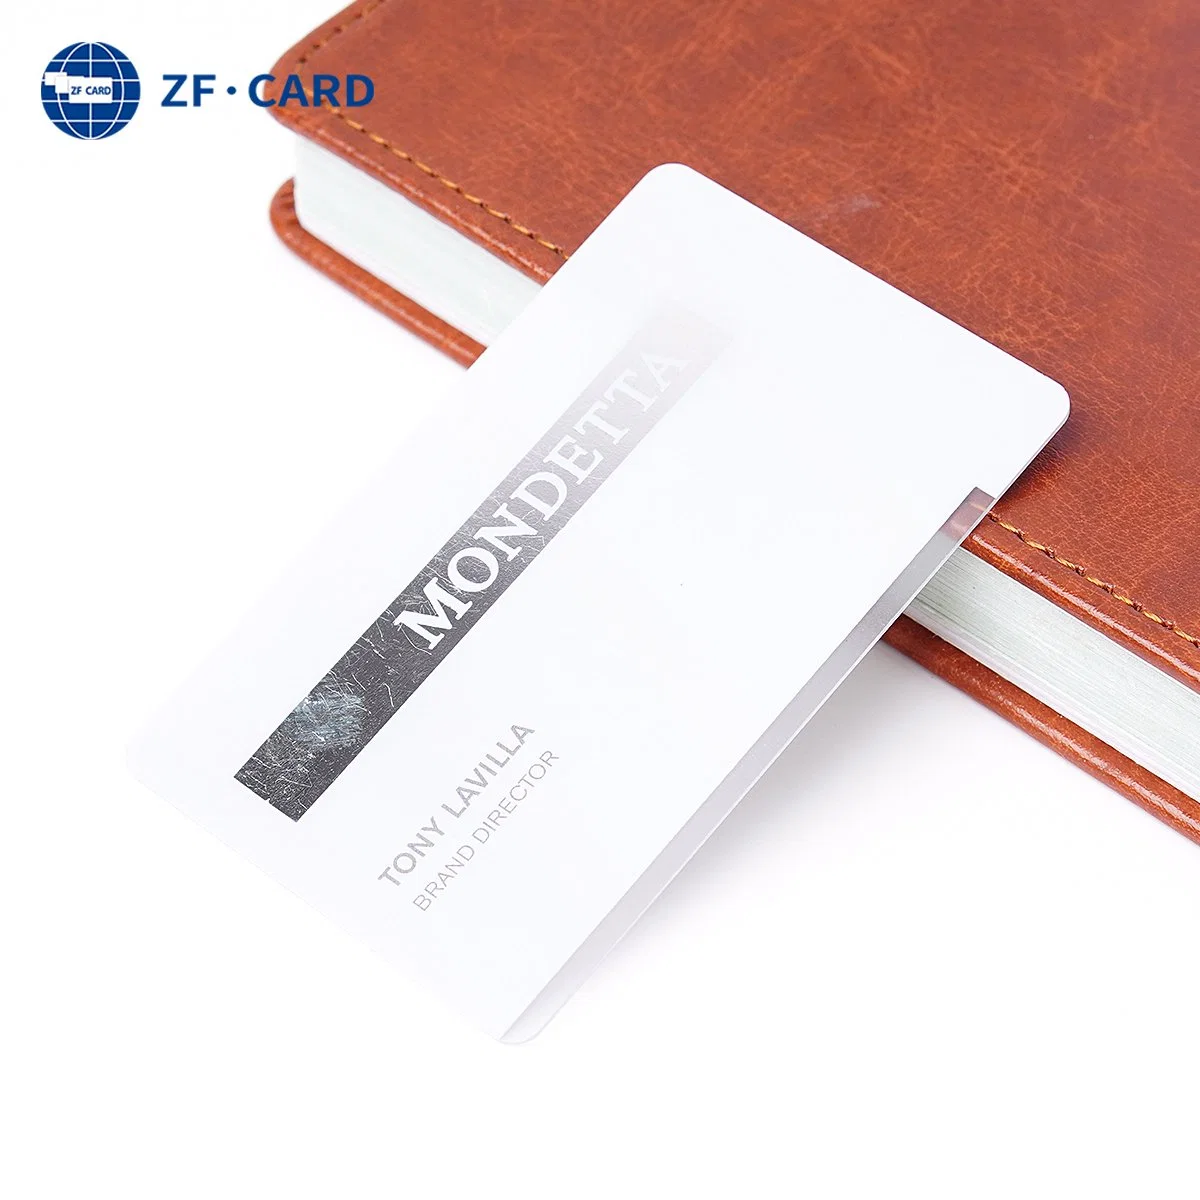 Plastic Card RFID Card 13.56MHz MIFARE (R) Classic 1K Smart Card White PVC Card for Business